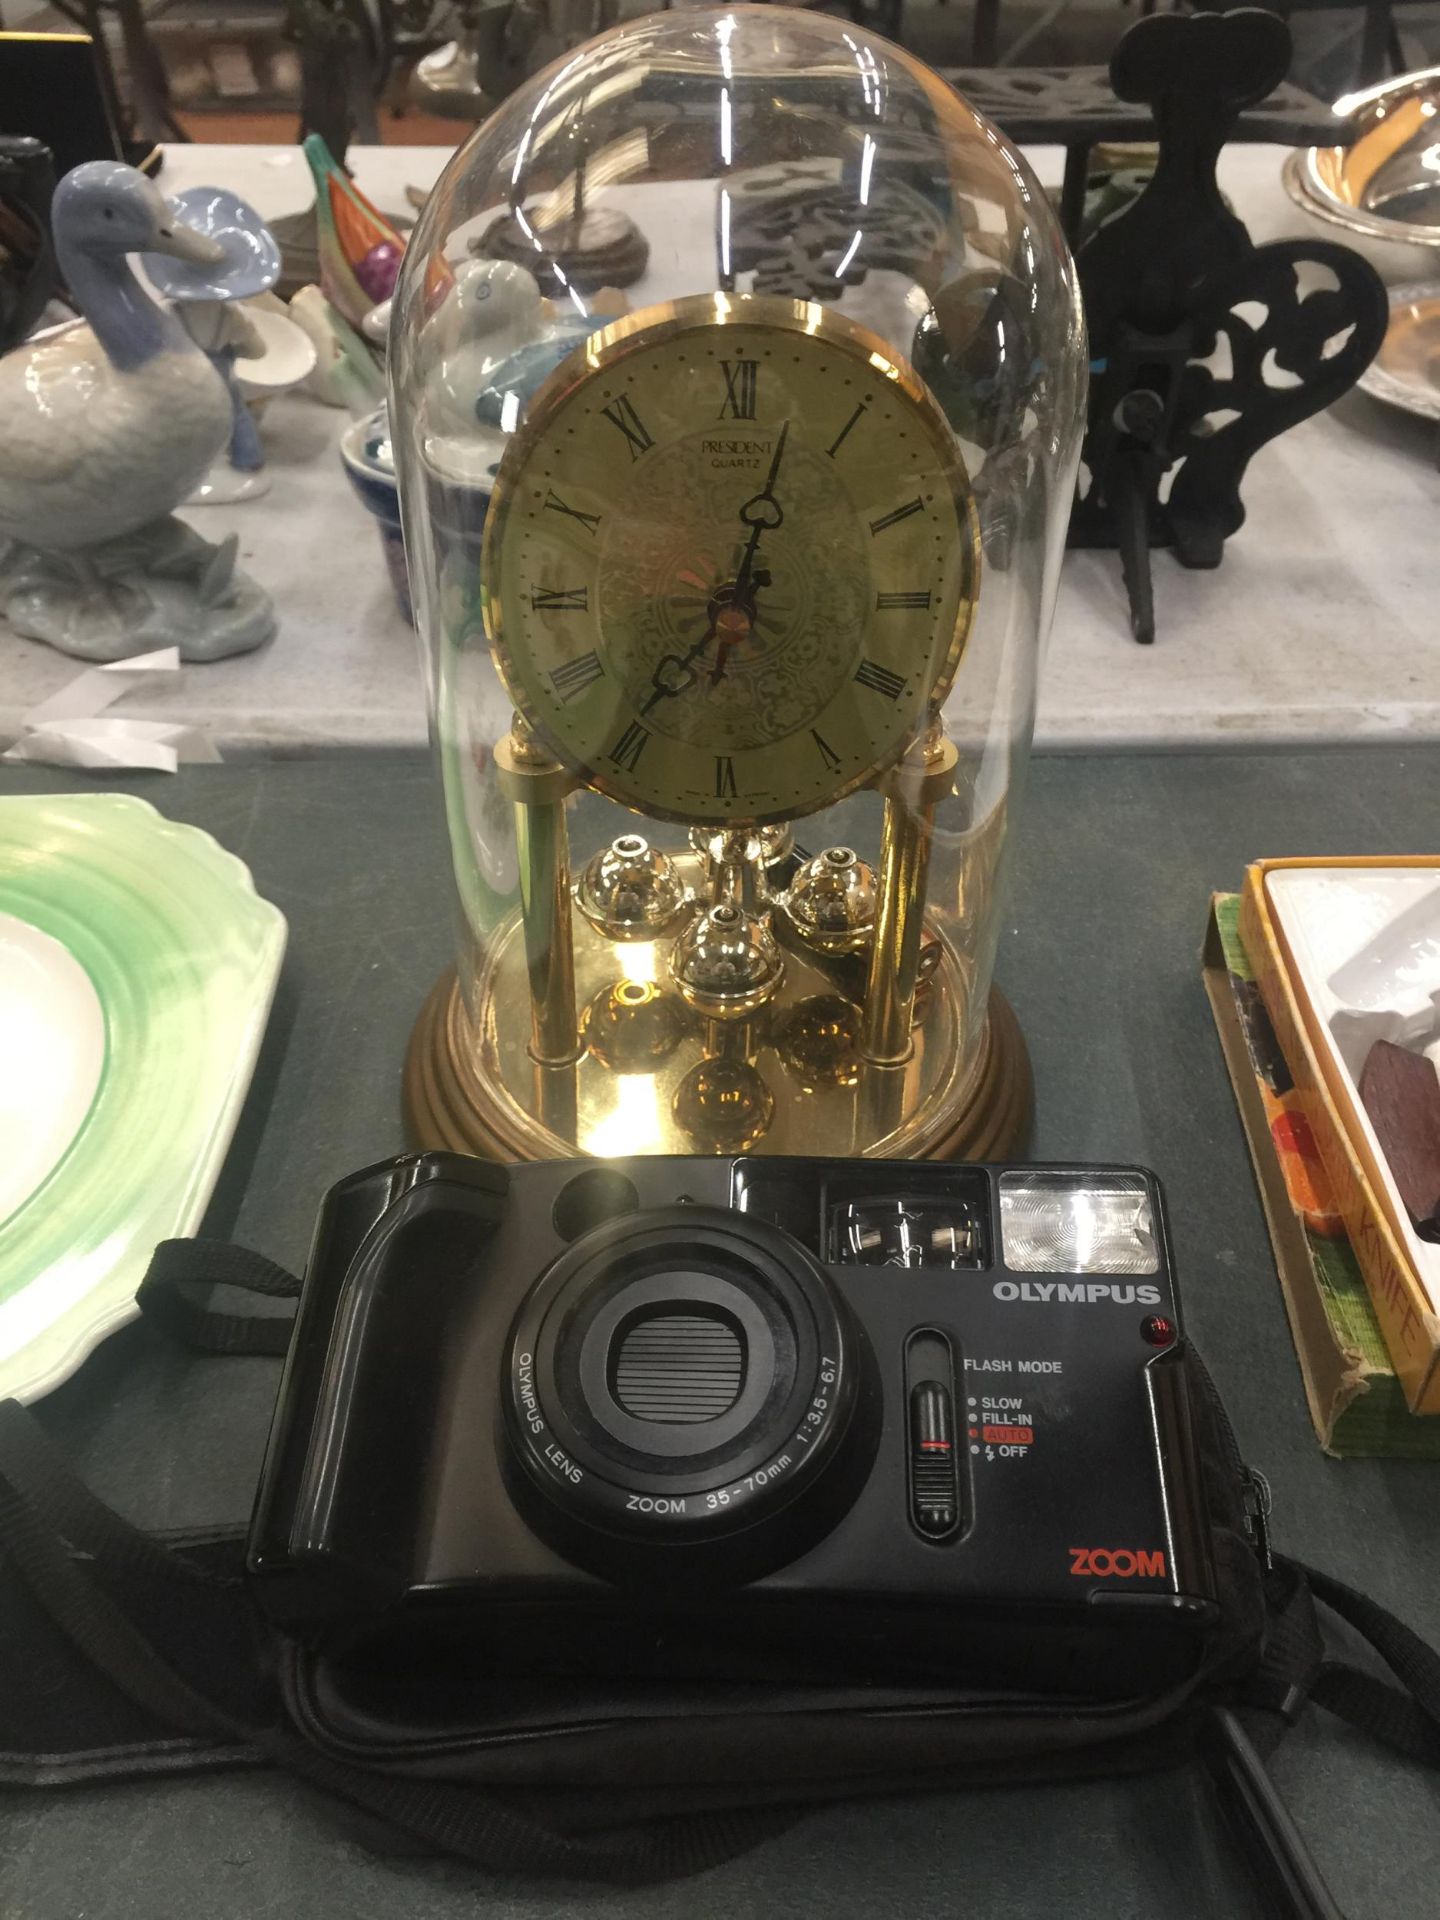 AN OLYMPUS AZ-1 ZOOM IN A CARRY CASE PLUS AN ANNIVERSARY MANTLE CLOCK WITH A GLASS DOME